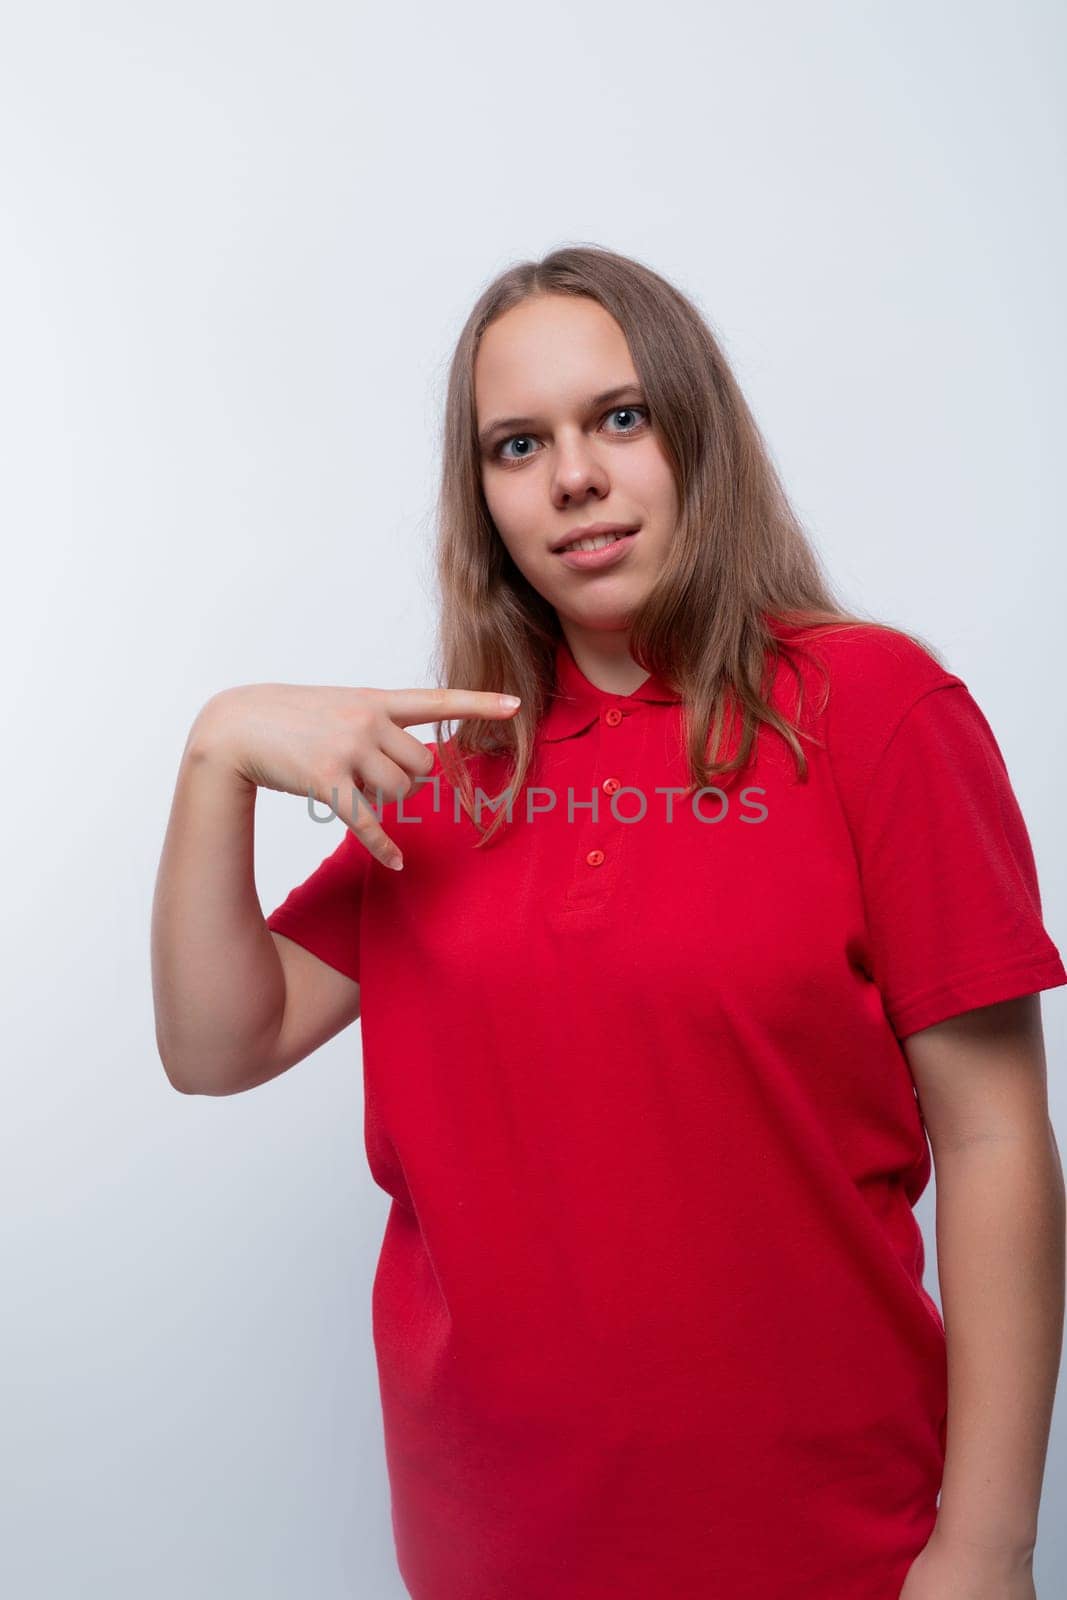 Caucasian girl with brown hair is wearing a red T-shirt.